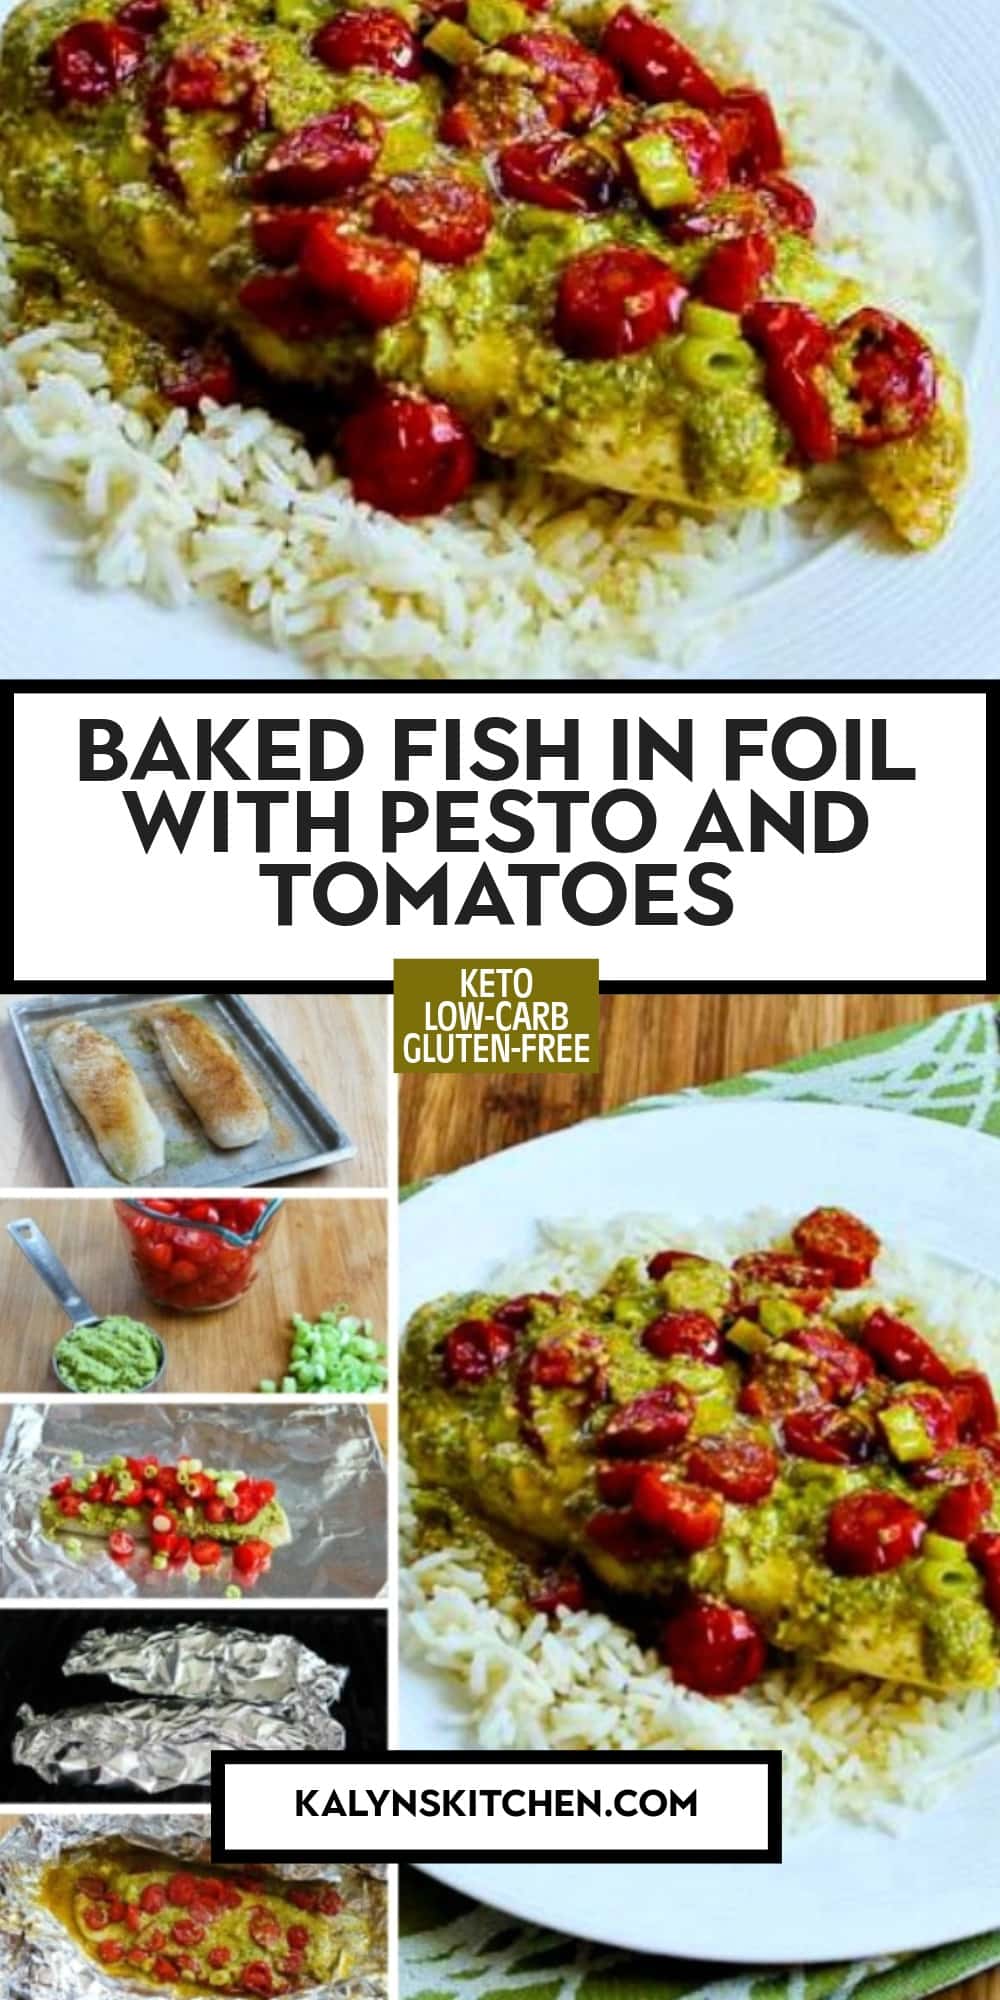 Pinterest image of Baked Fish in Foil with Pesto and Tomatoes